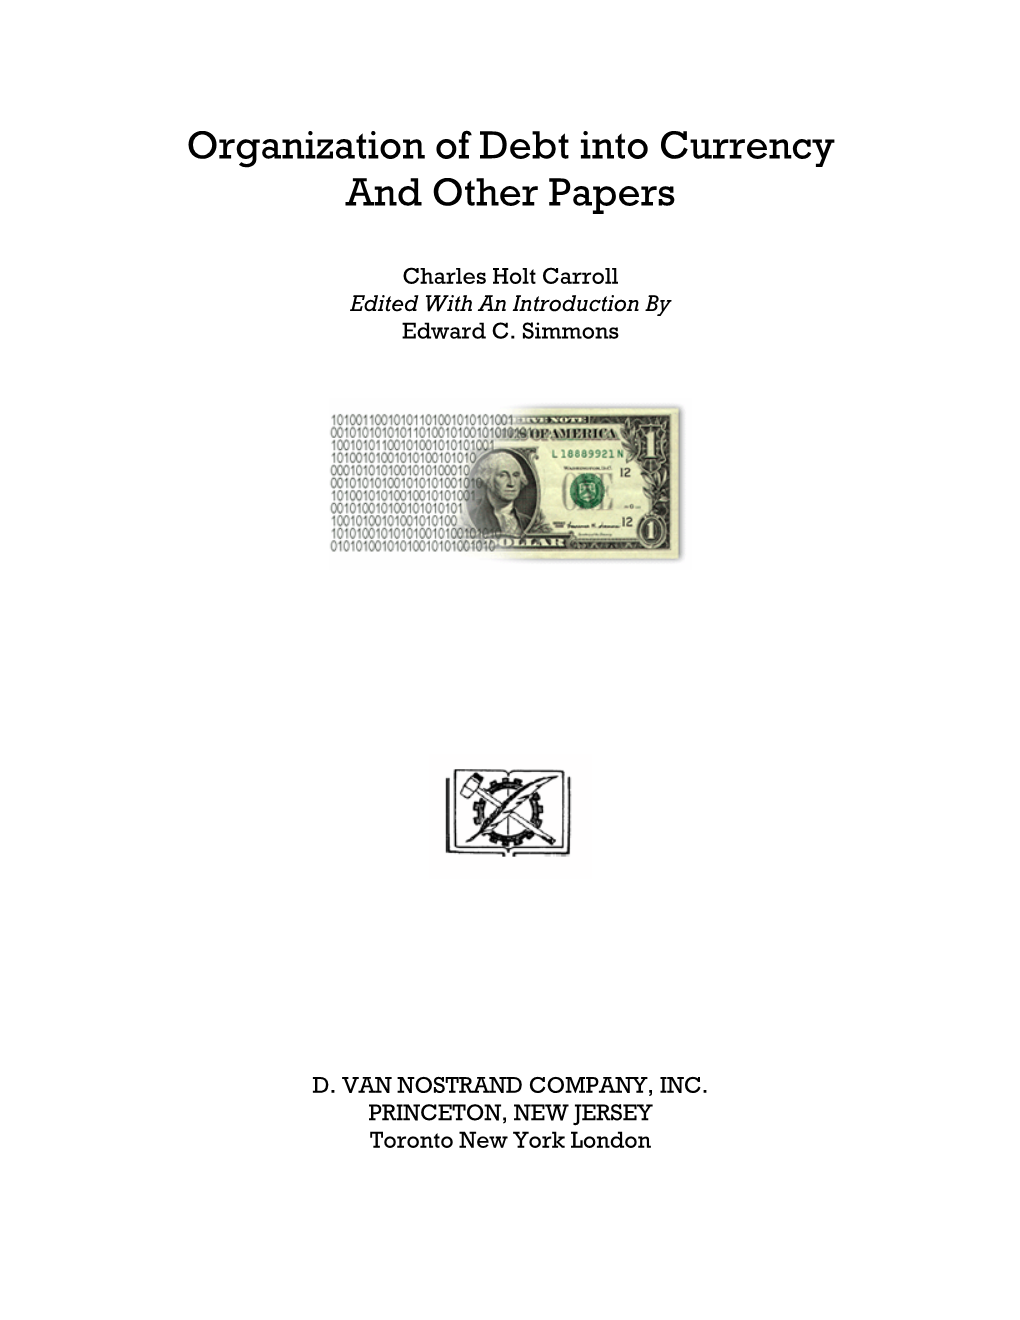 Organization of Debt Into Currency and Other Papers